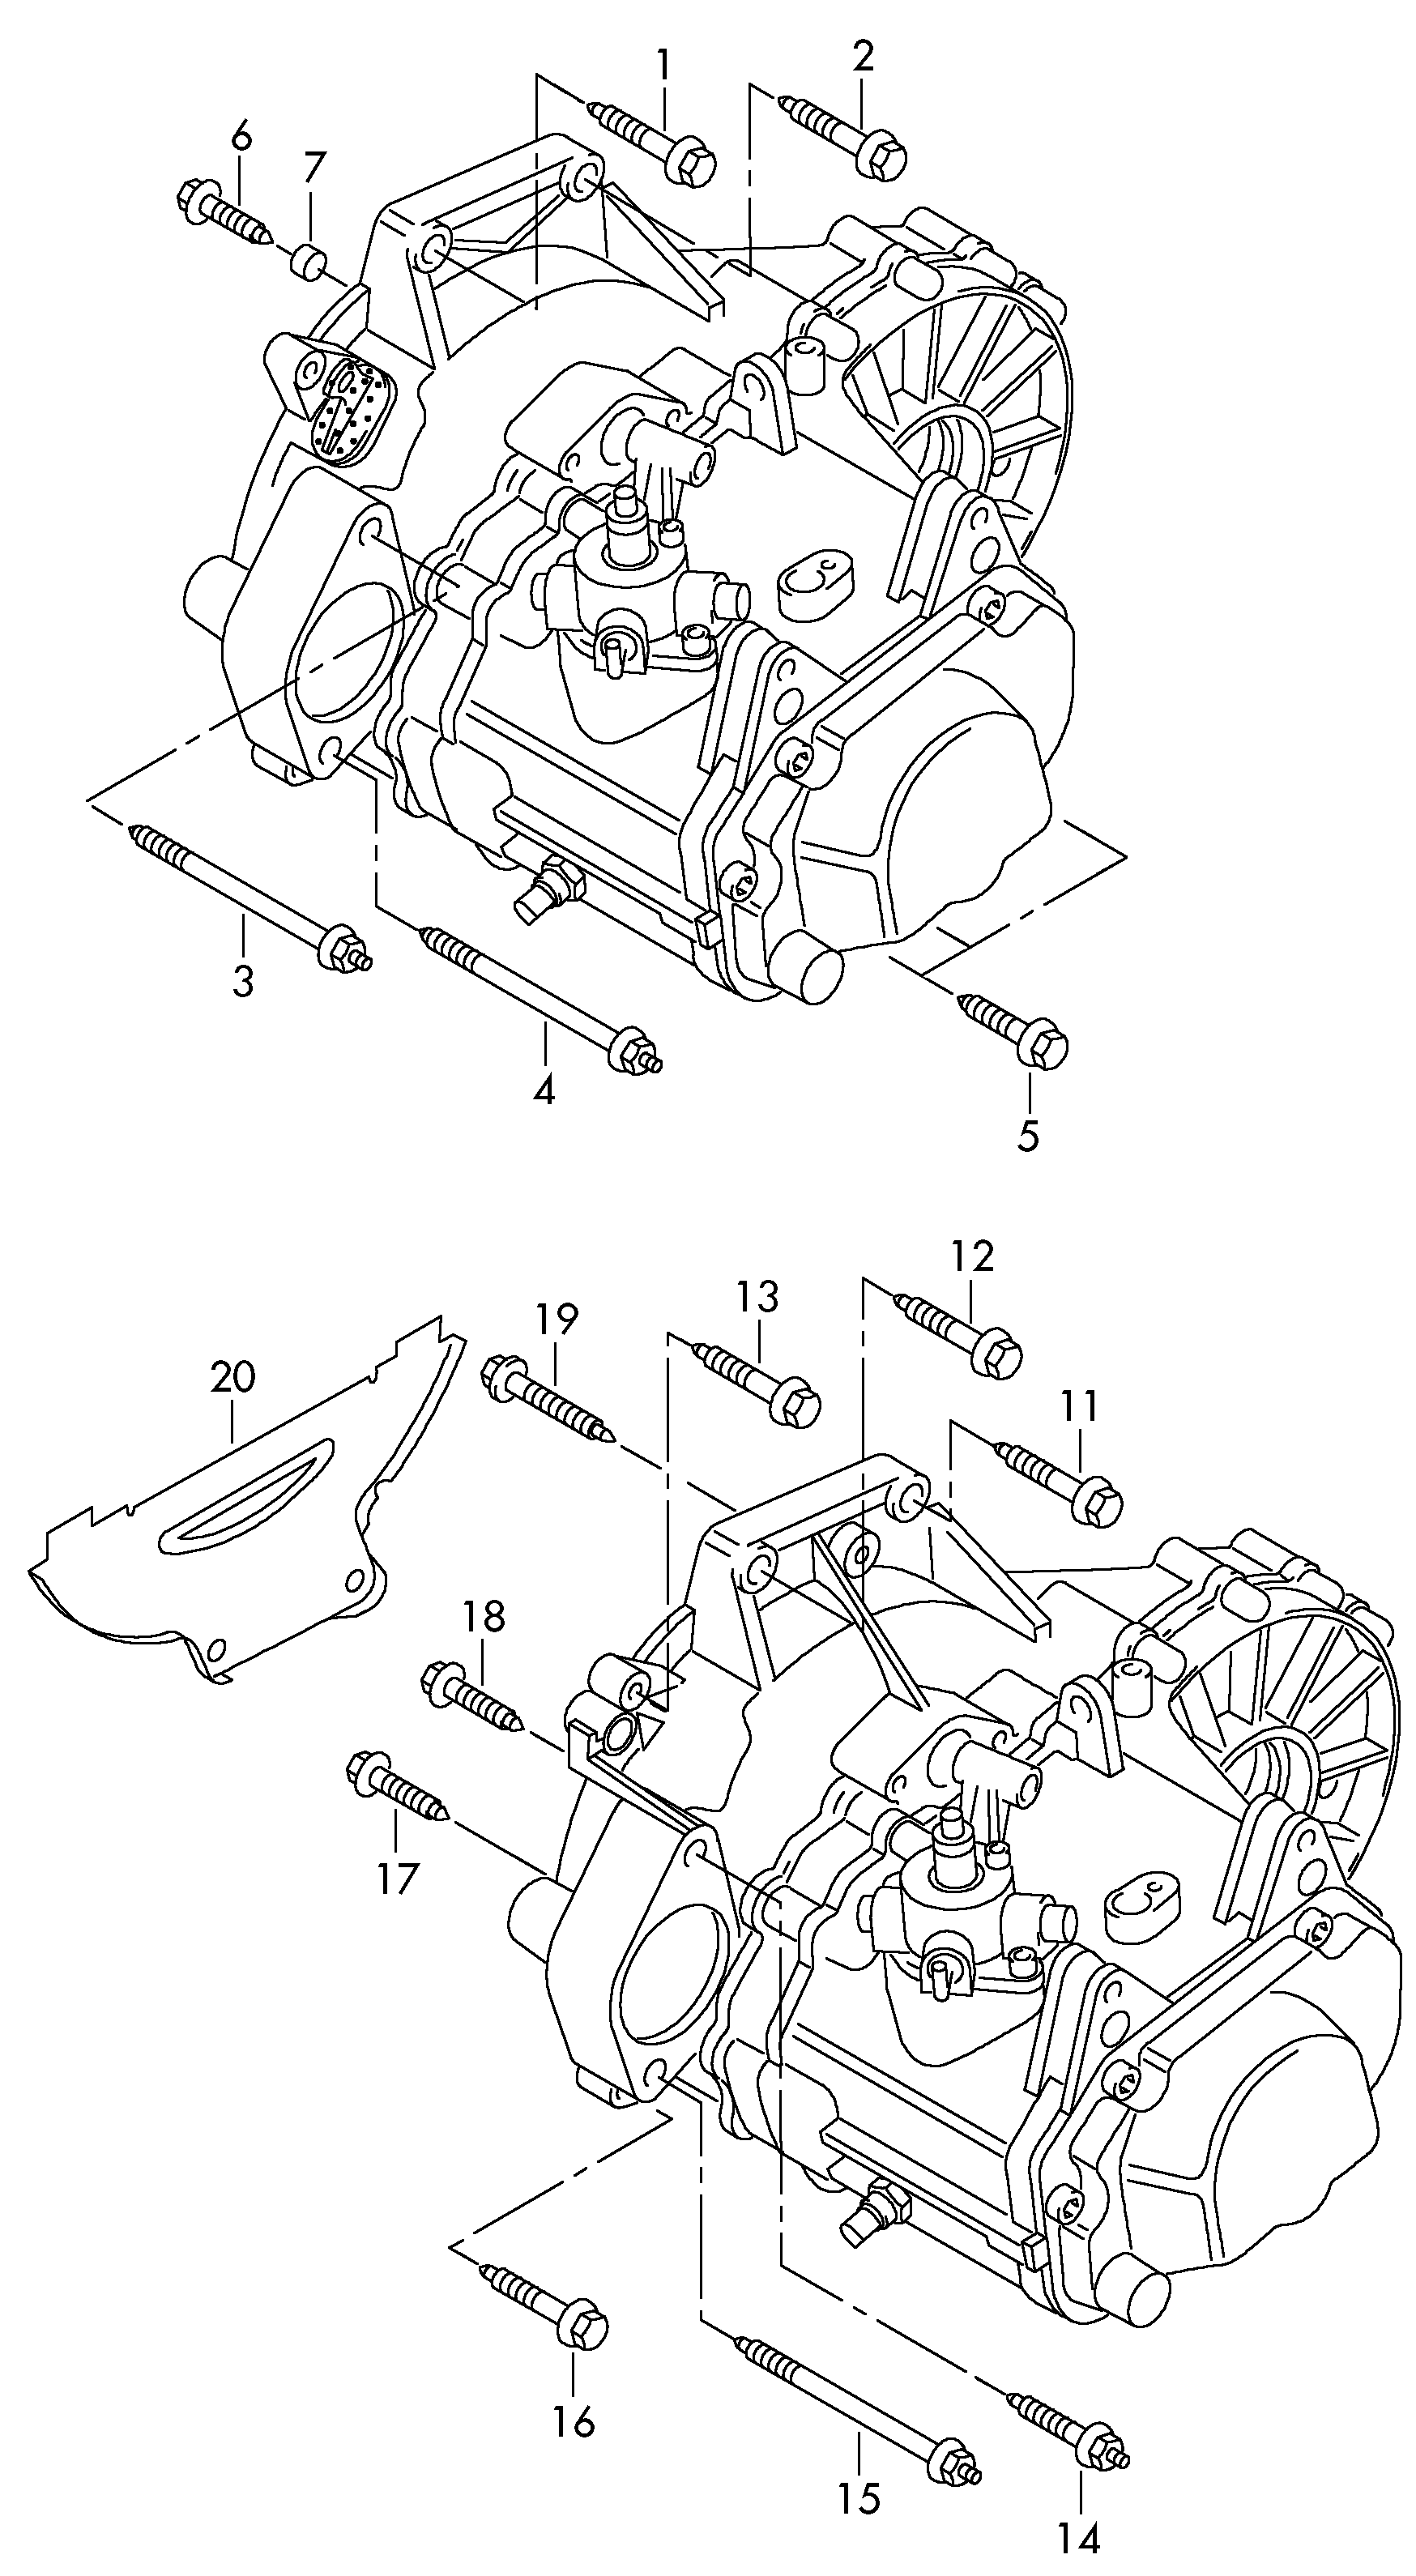 mounting parts for engine and<br>transmissionfor 5 speed manual transmiss.  - Caddy - cad